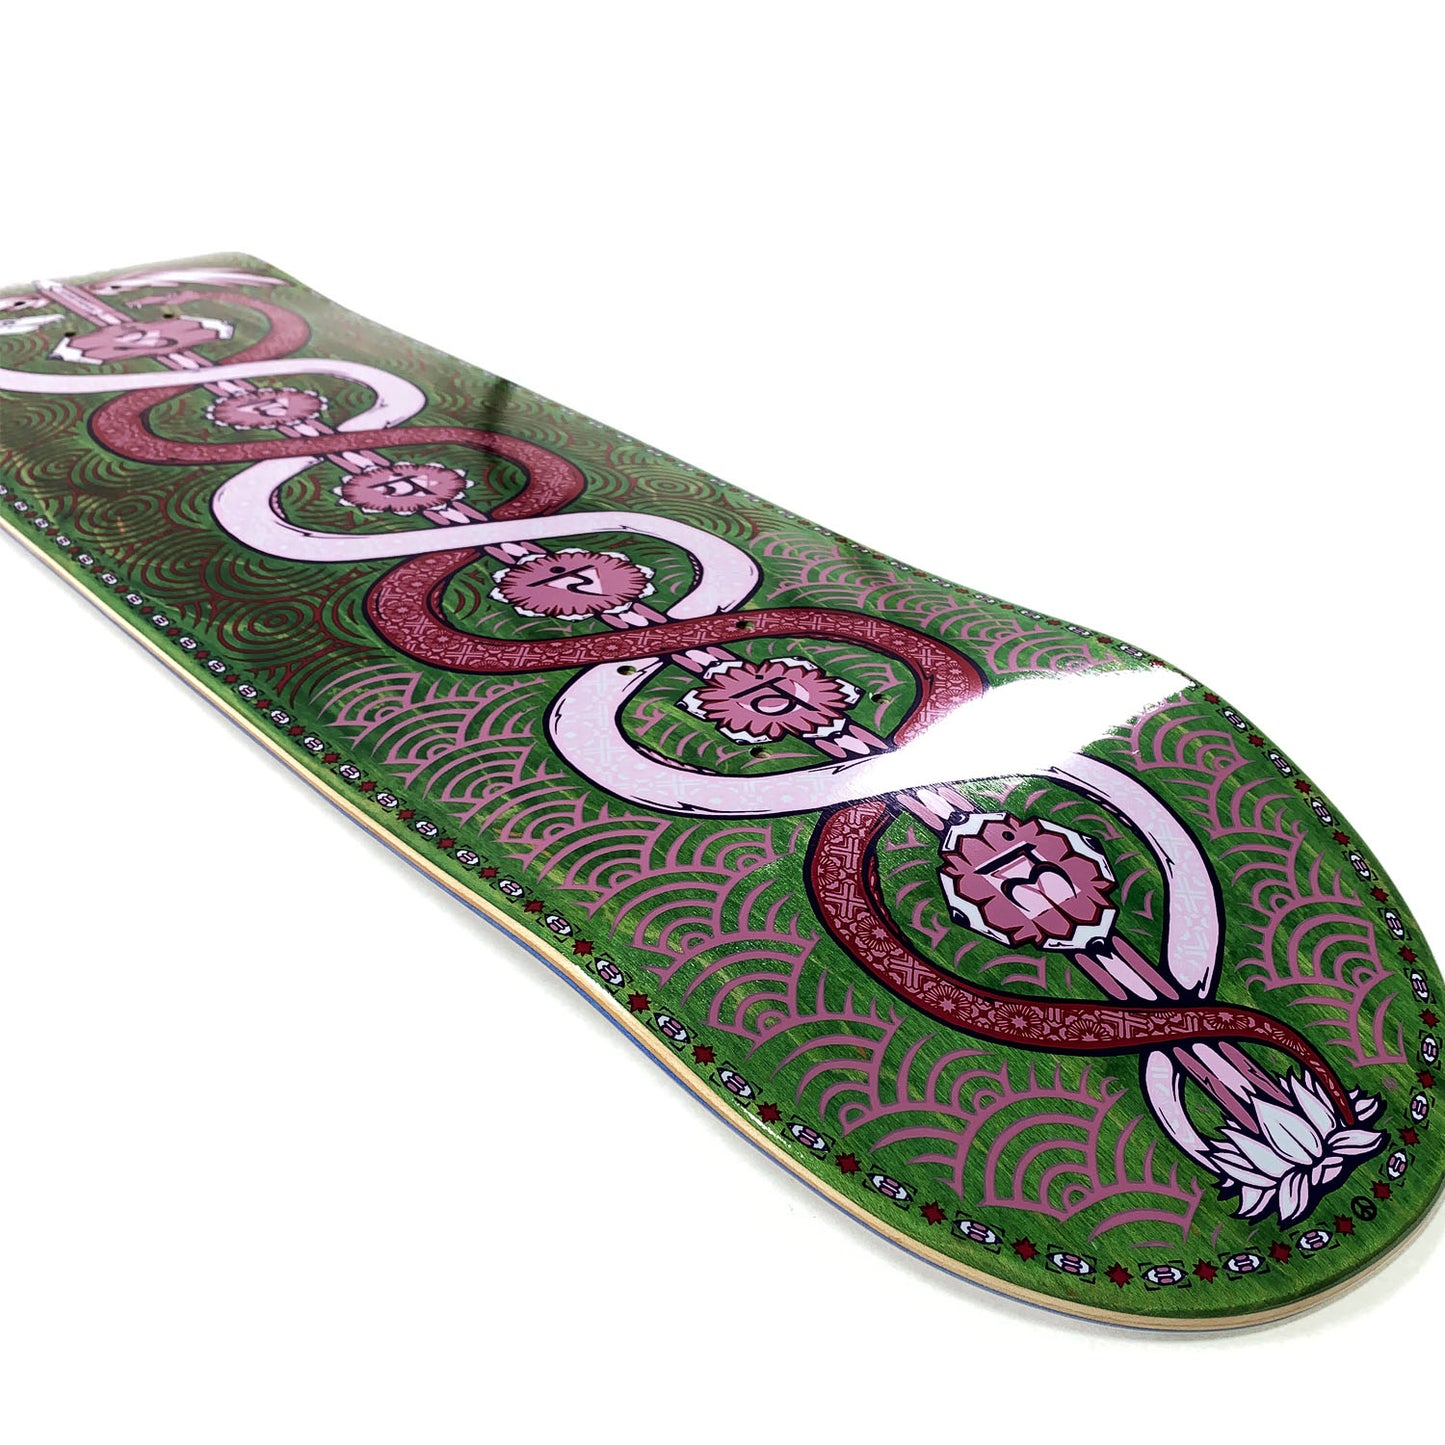 The Drawing Boards - 8.0" - Caduceus and the 7 Lotuses Deck - Prime Delux Store